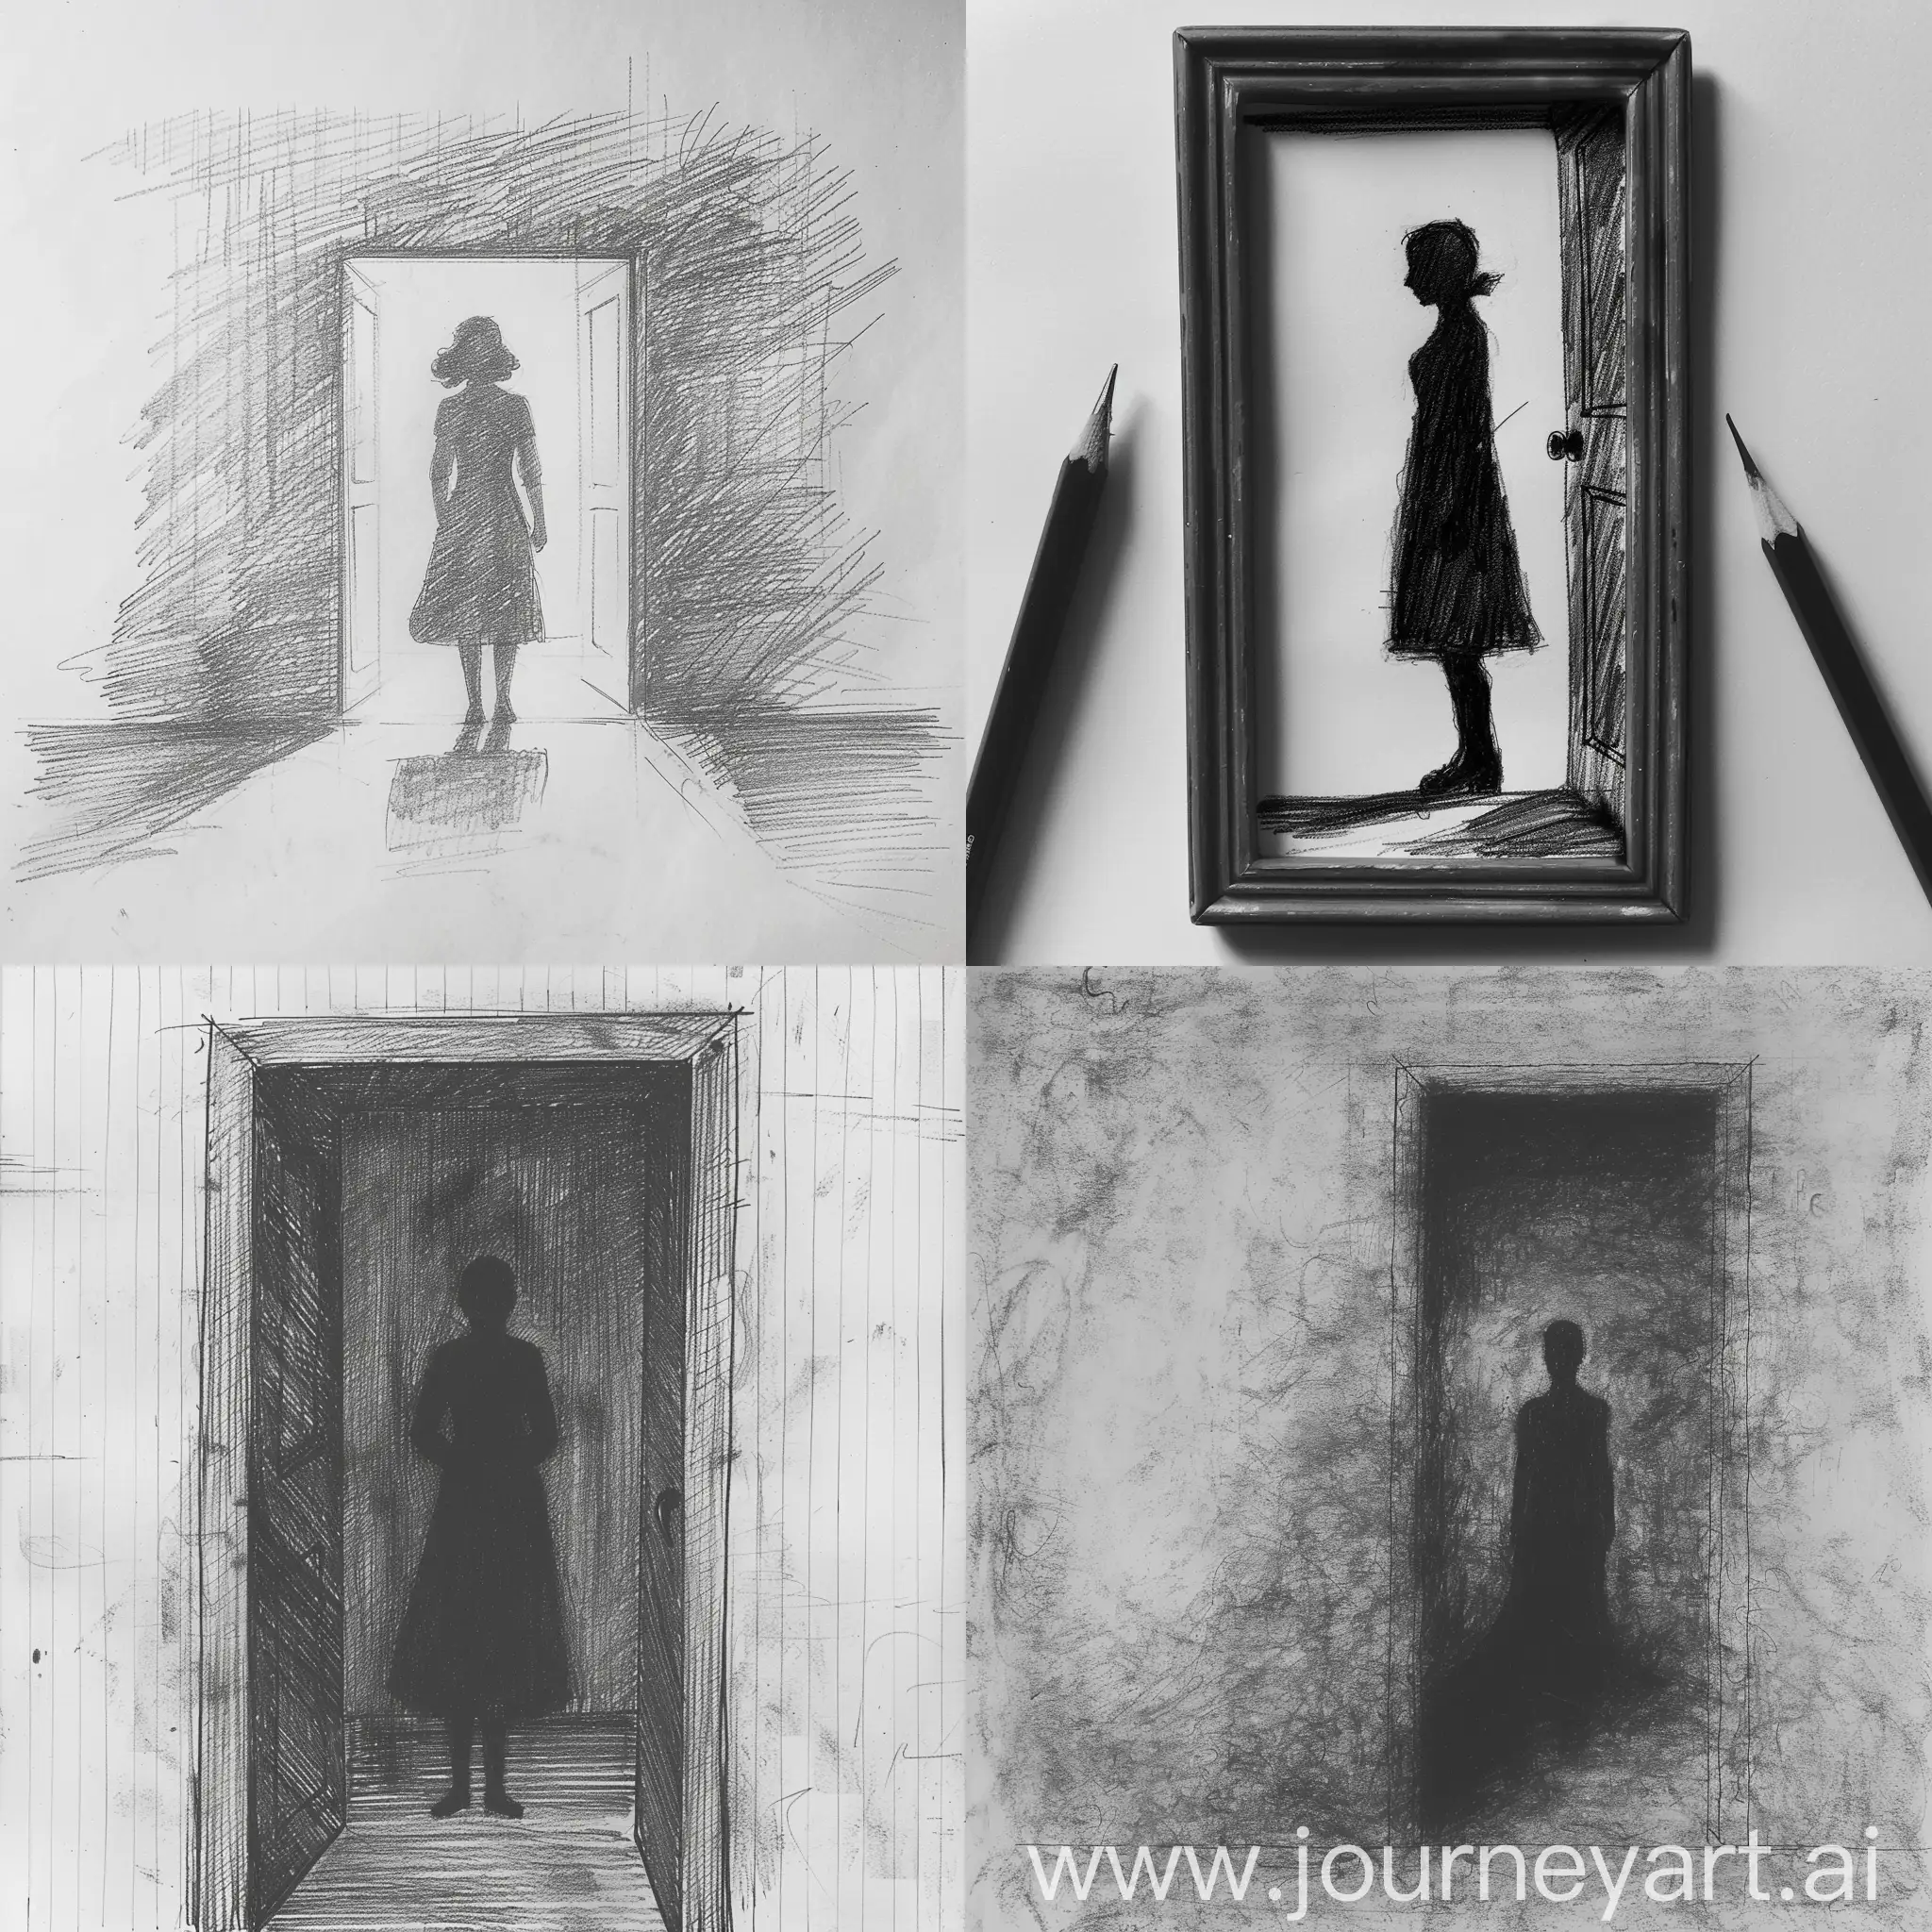 a pencil diagram of the silhouette of a woman stood in a door frame, creepy